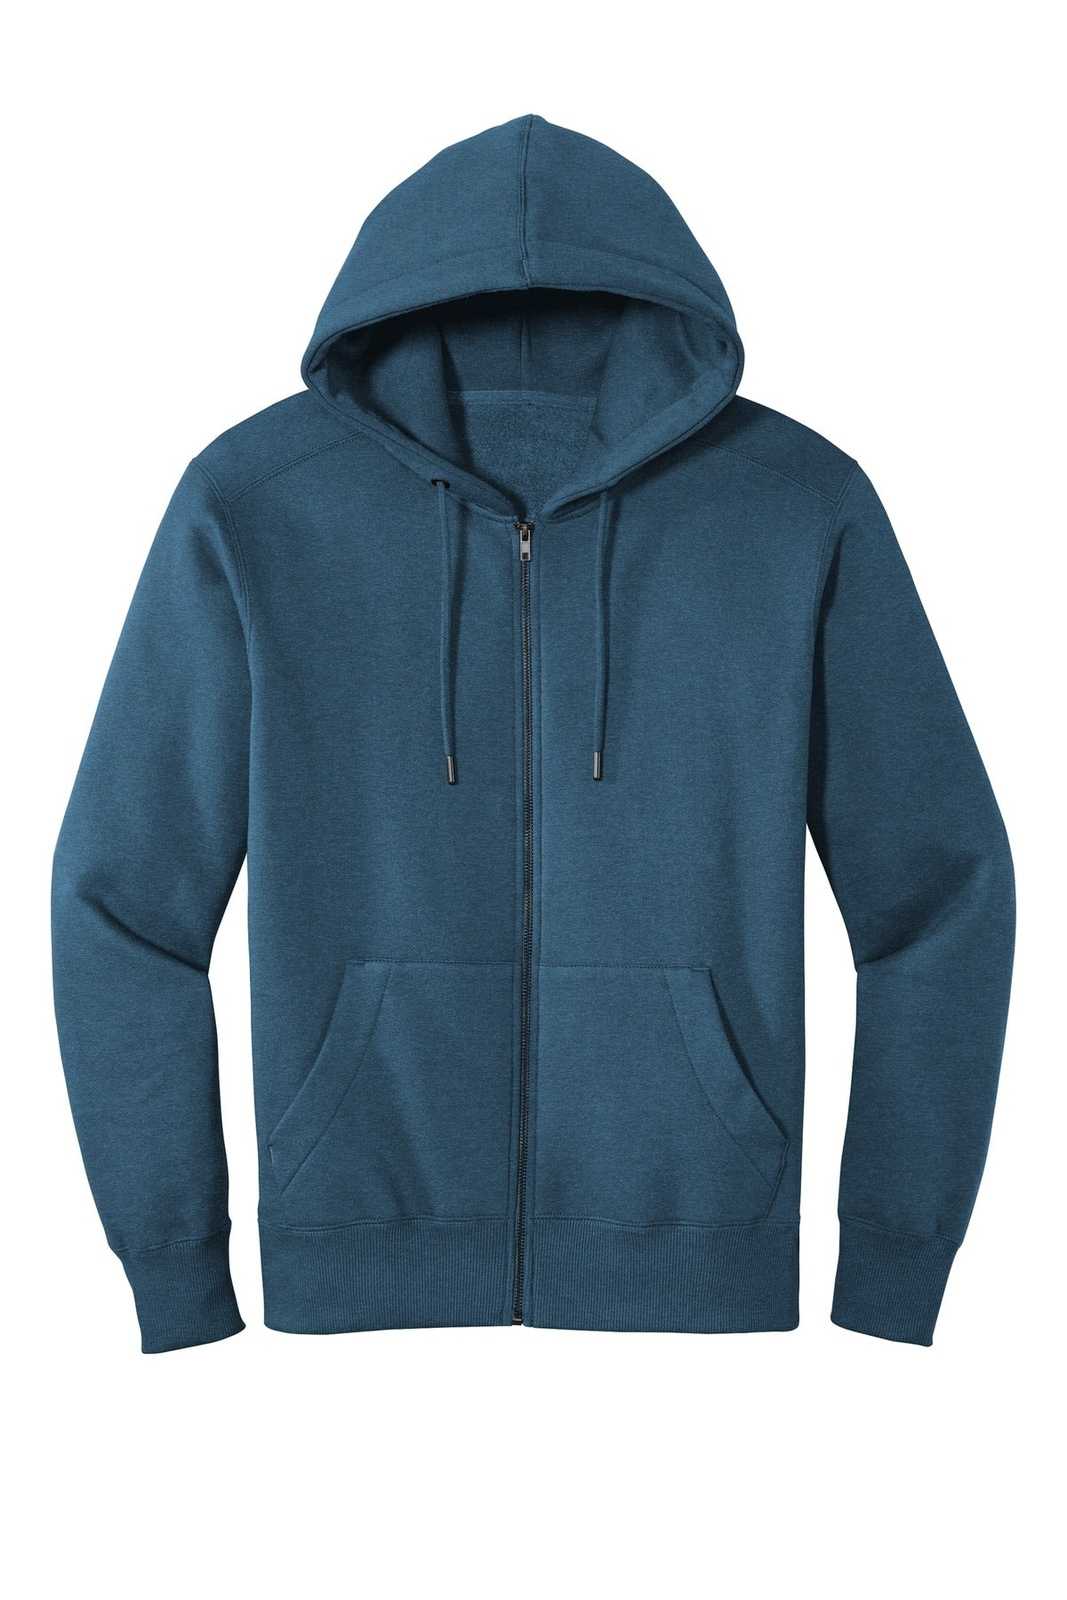 District DT1103 Perfect Weight Fleece Full-Zip Hoodie - Heathered Poseidon Blue - HIT a Double - 5